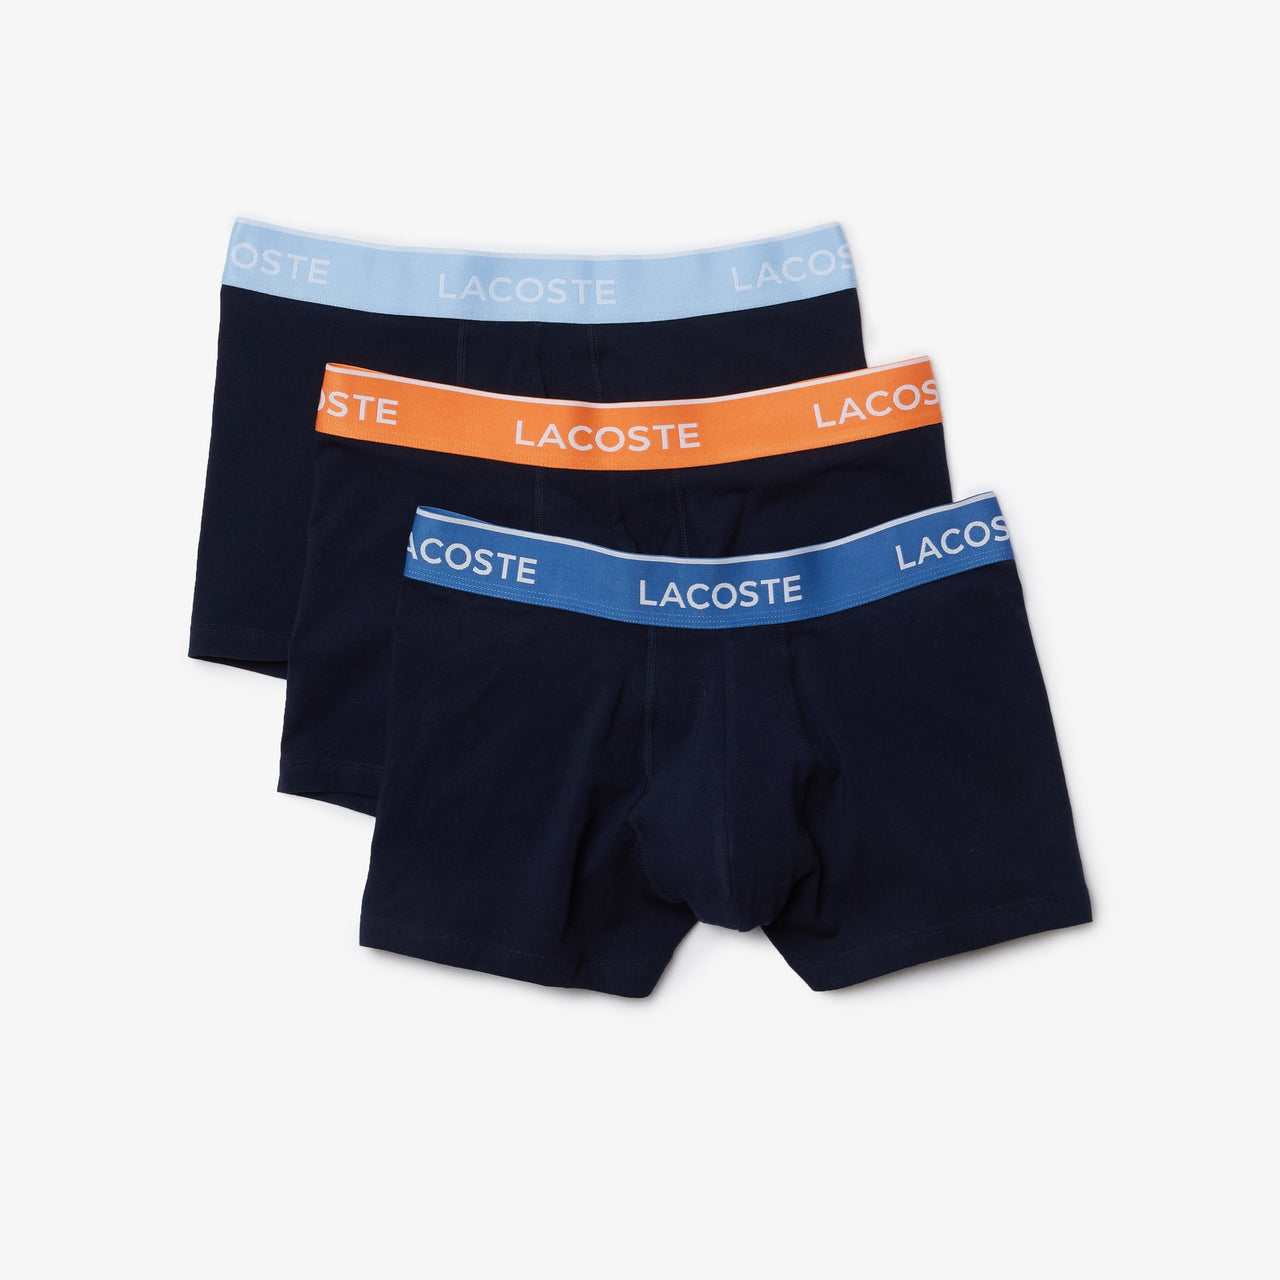 5H3401LXM Calzoncillo boxer lacoste 5h3401 - pack trunk - Medina Menswear®